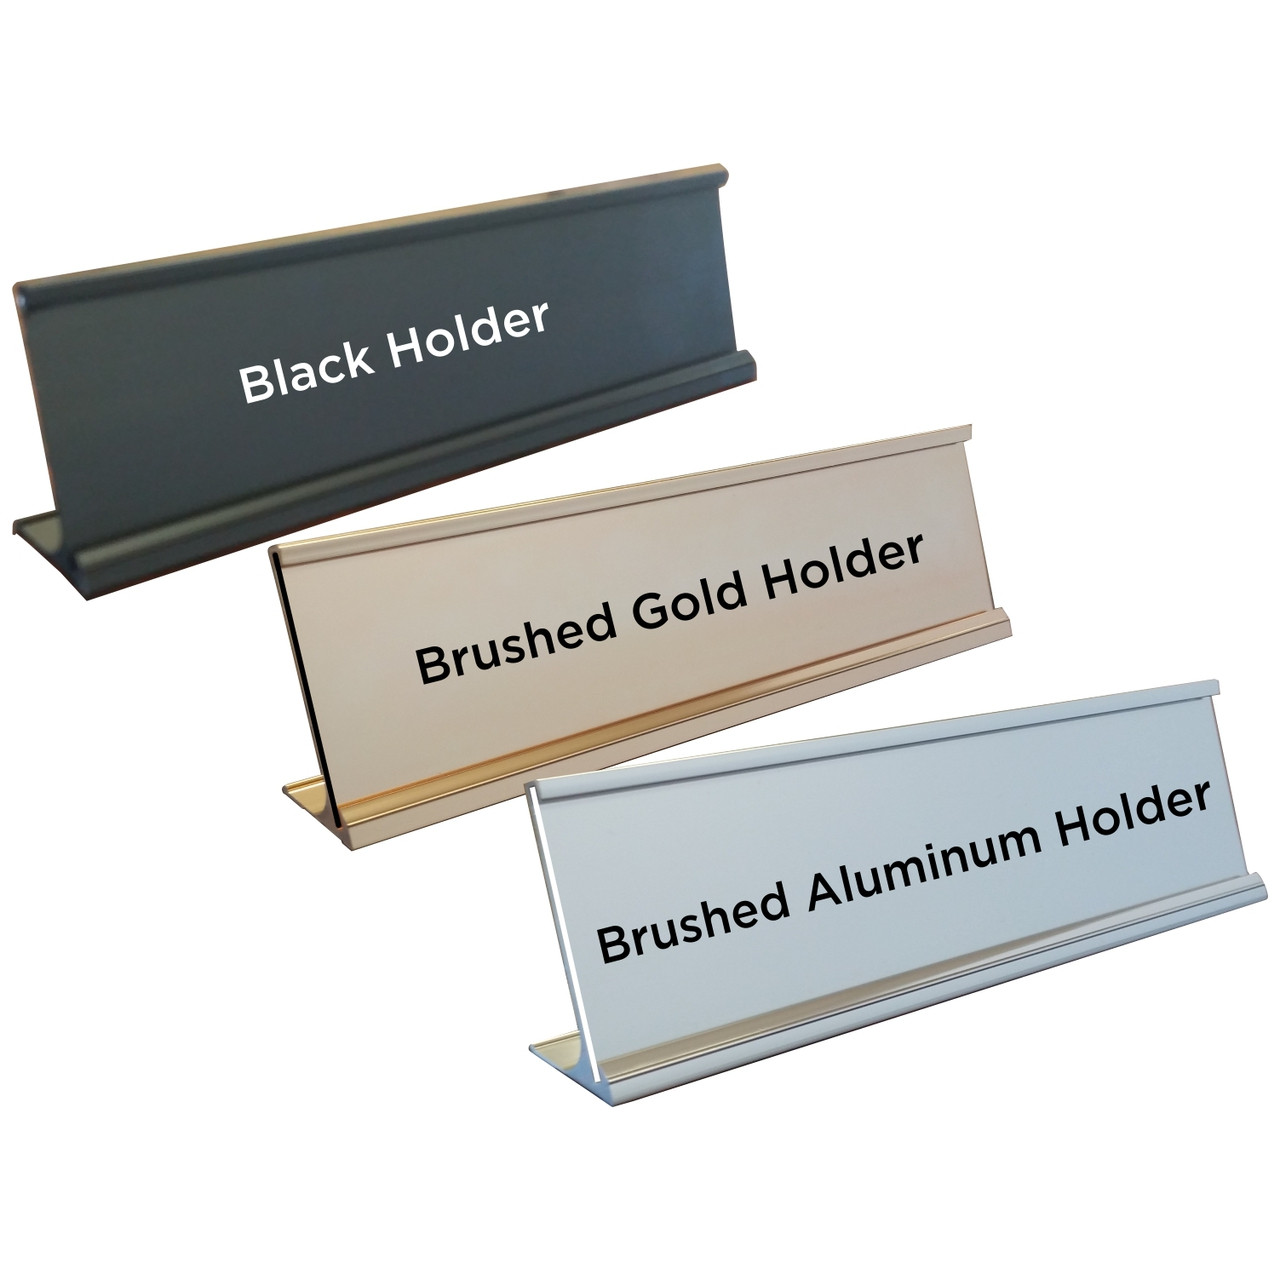 Ford Name Plates with Optional Holder